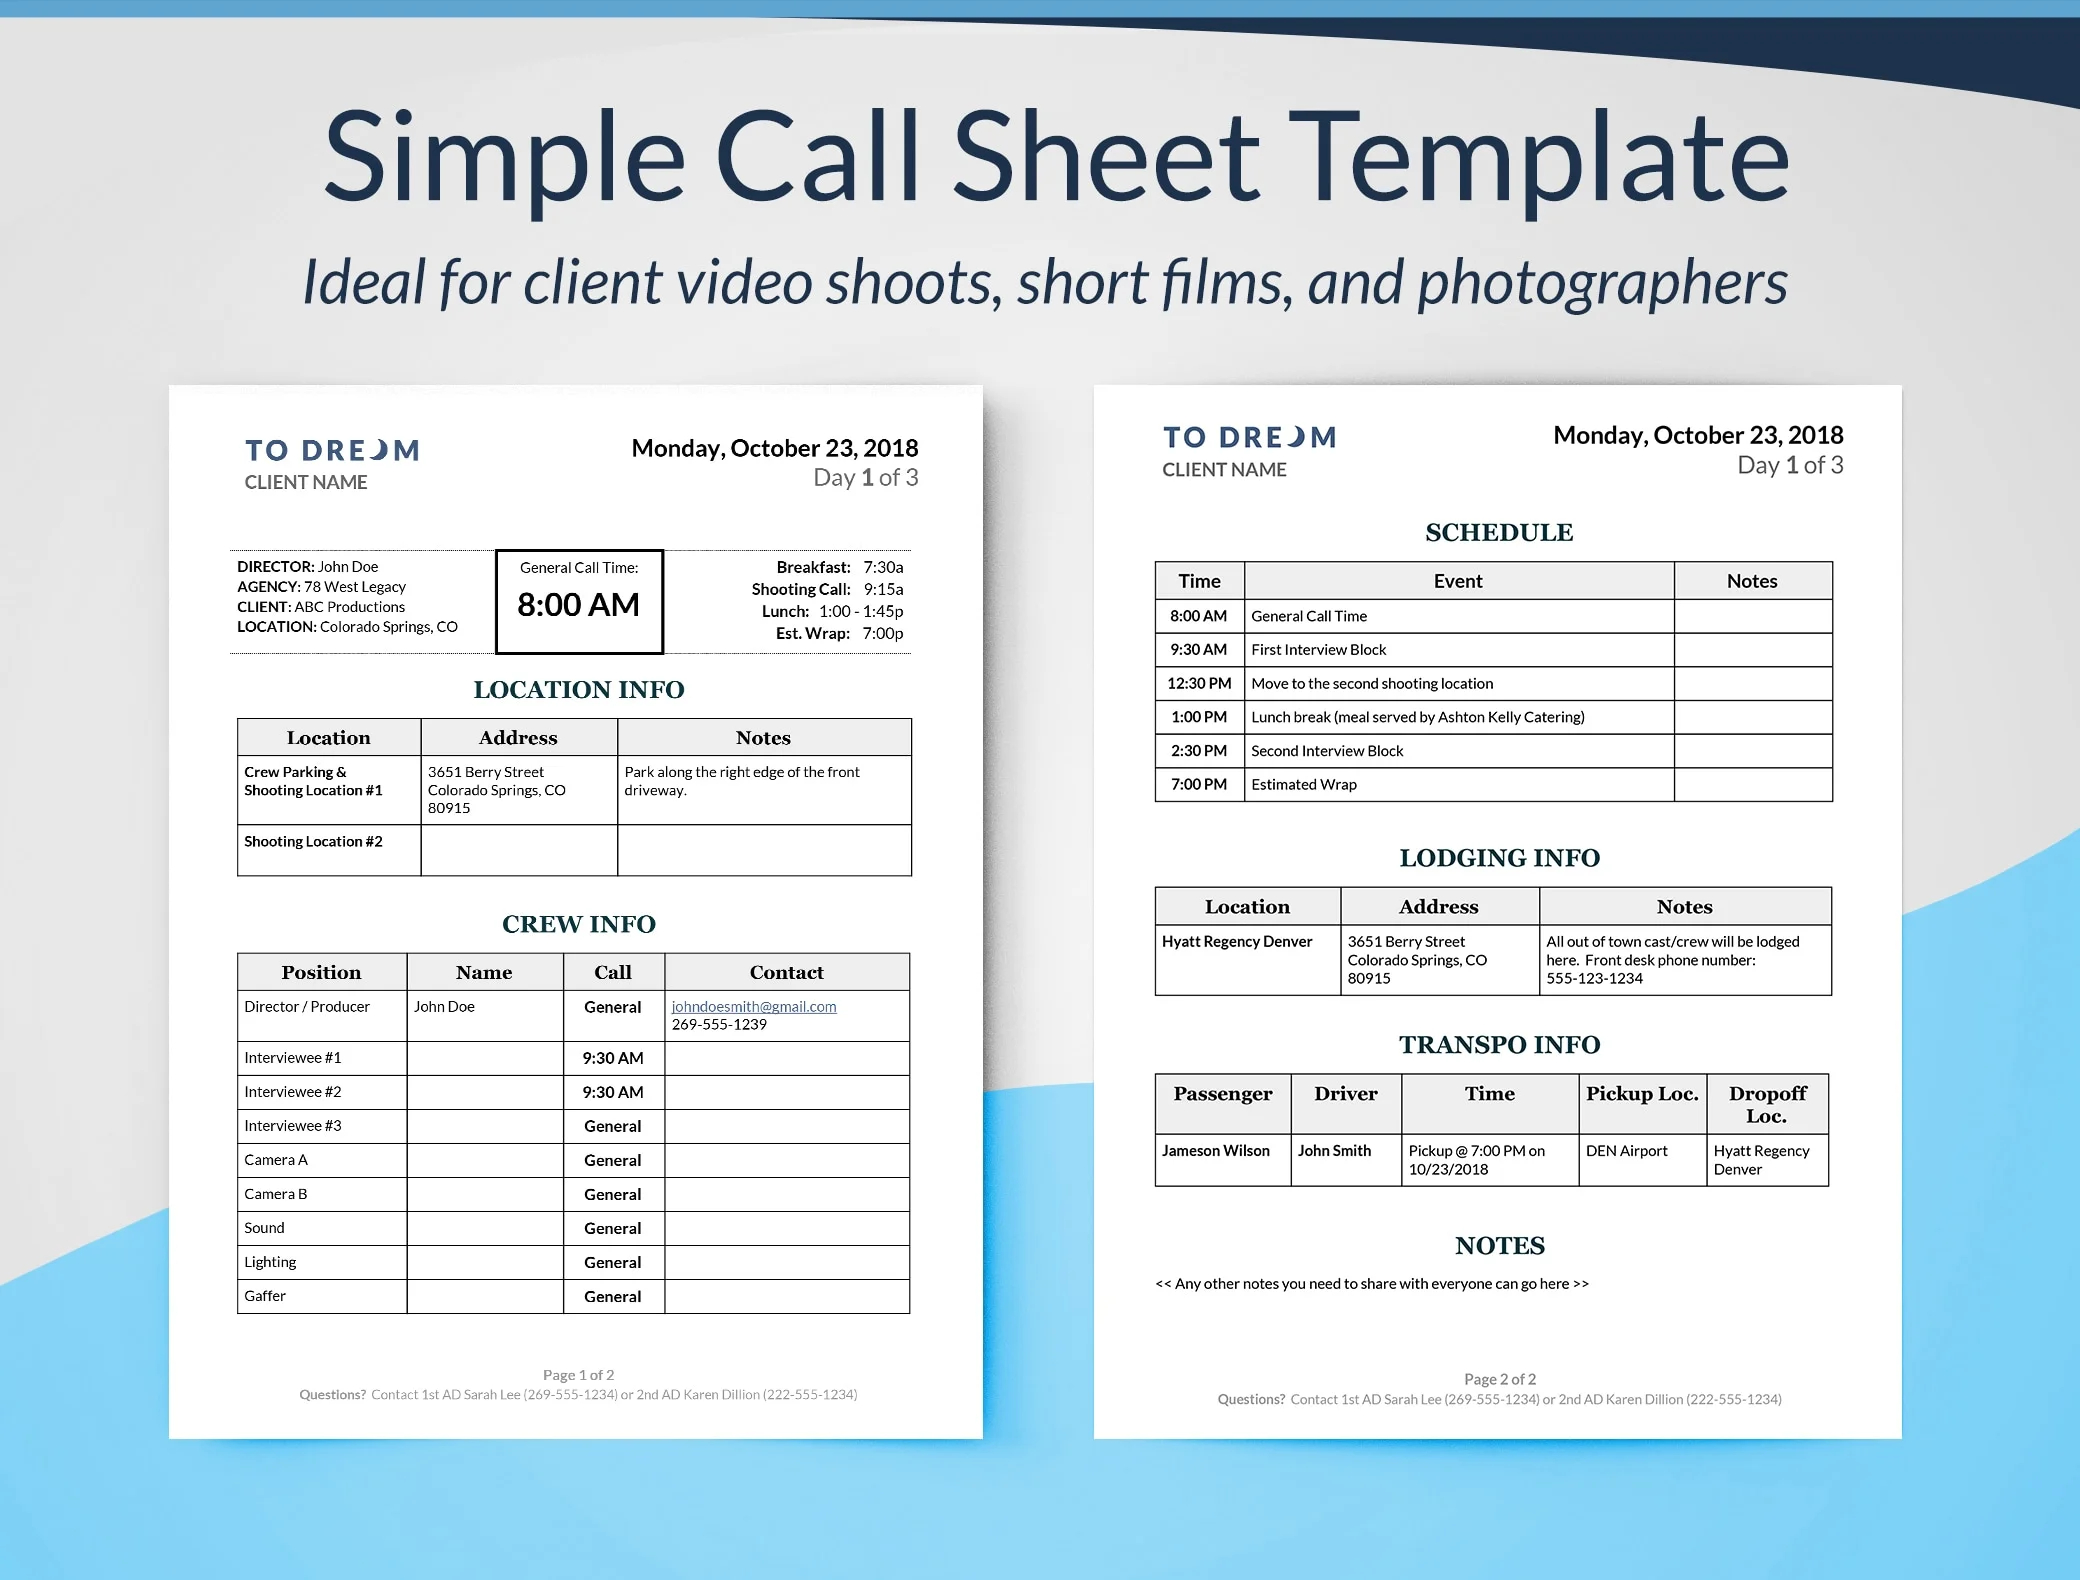 Simple Call Sheet Template - SetHero Pertaining To Blank Call Sheet Template